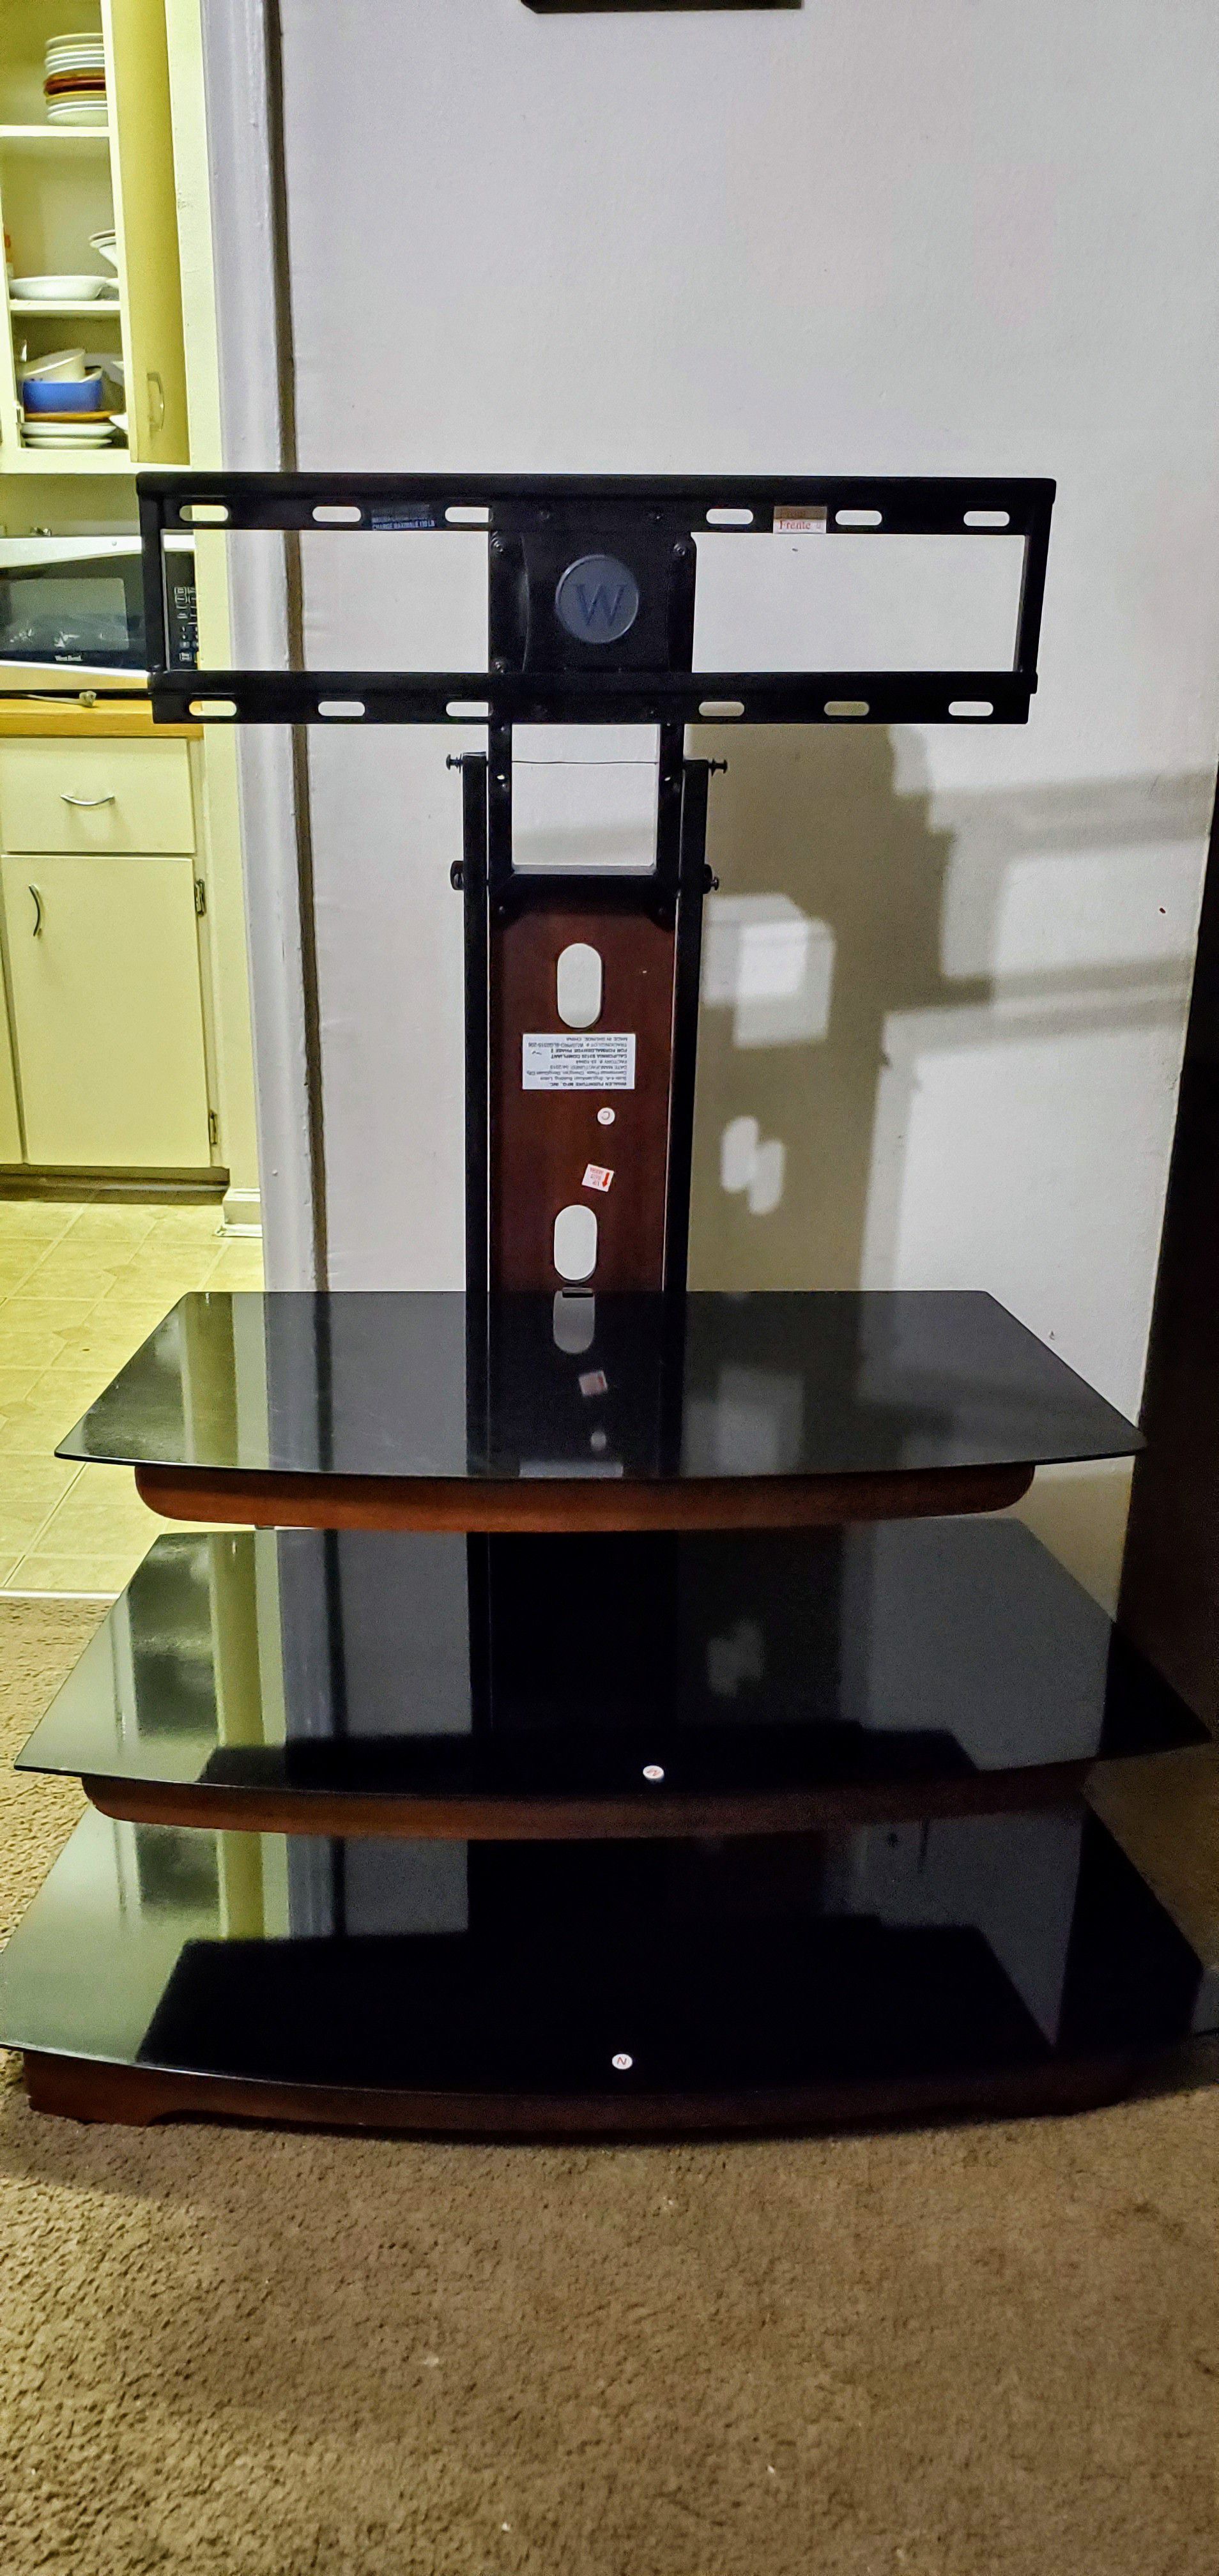 Very good TV stand maximum 135 lbs load